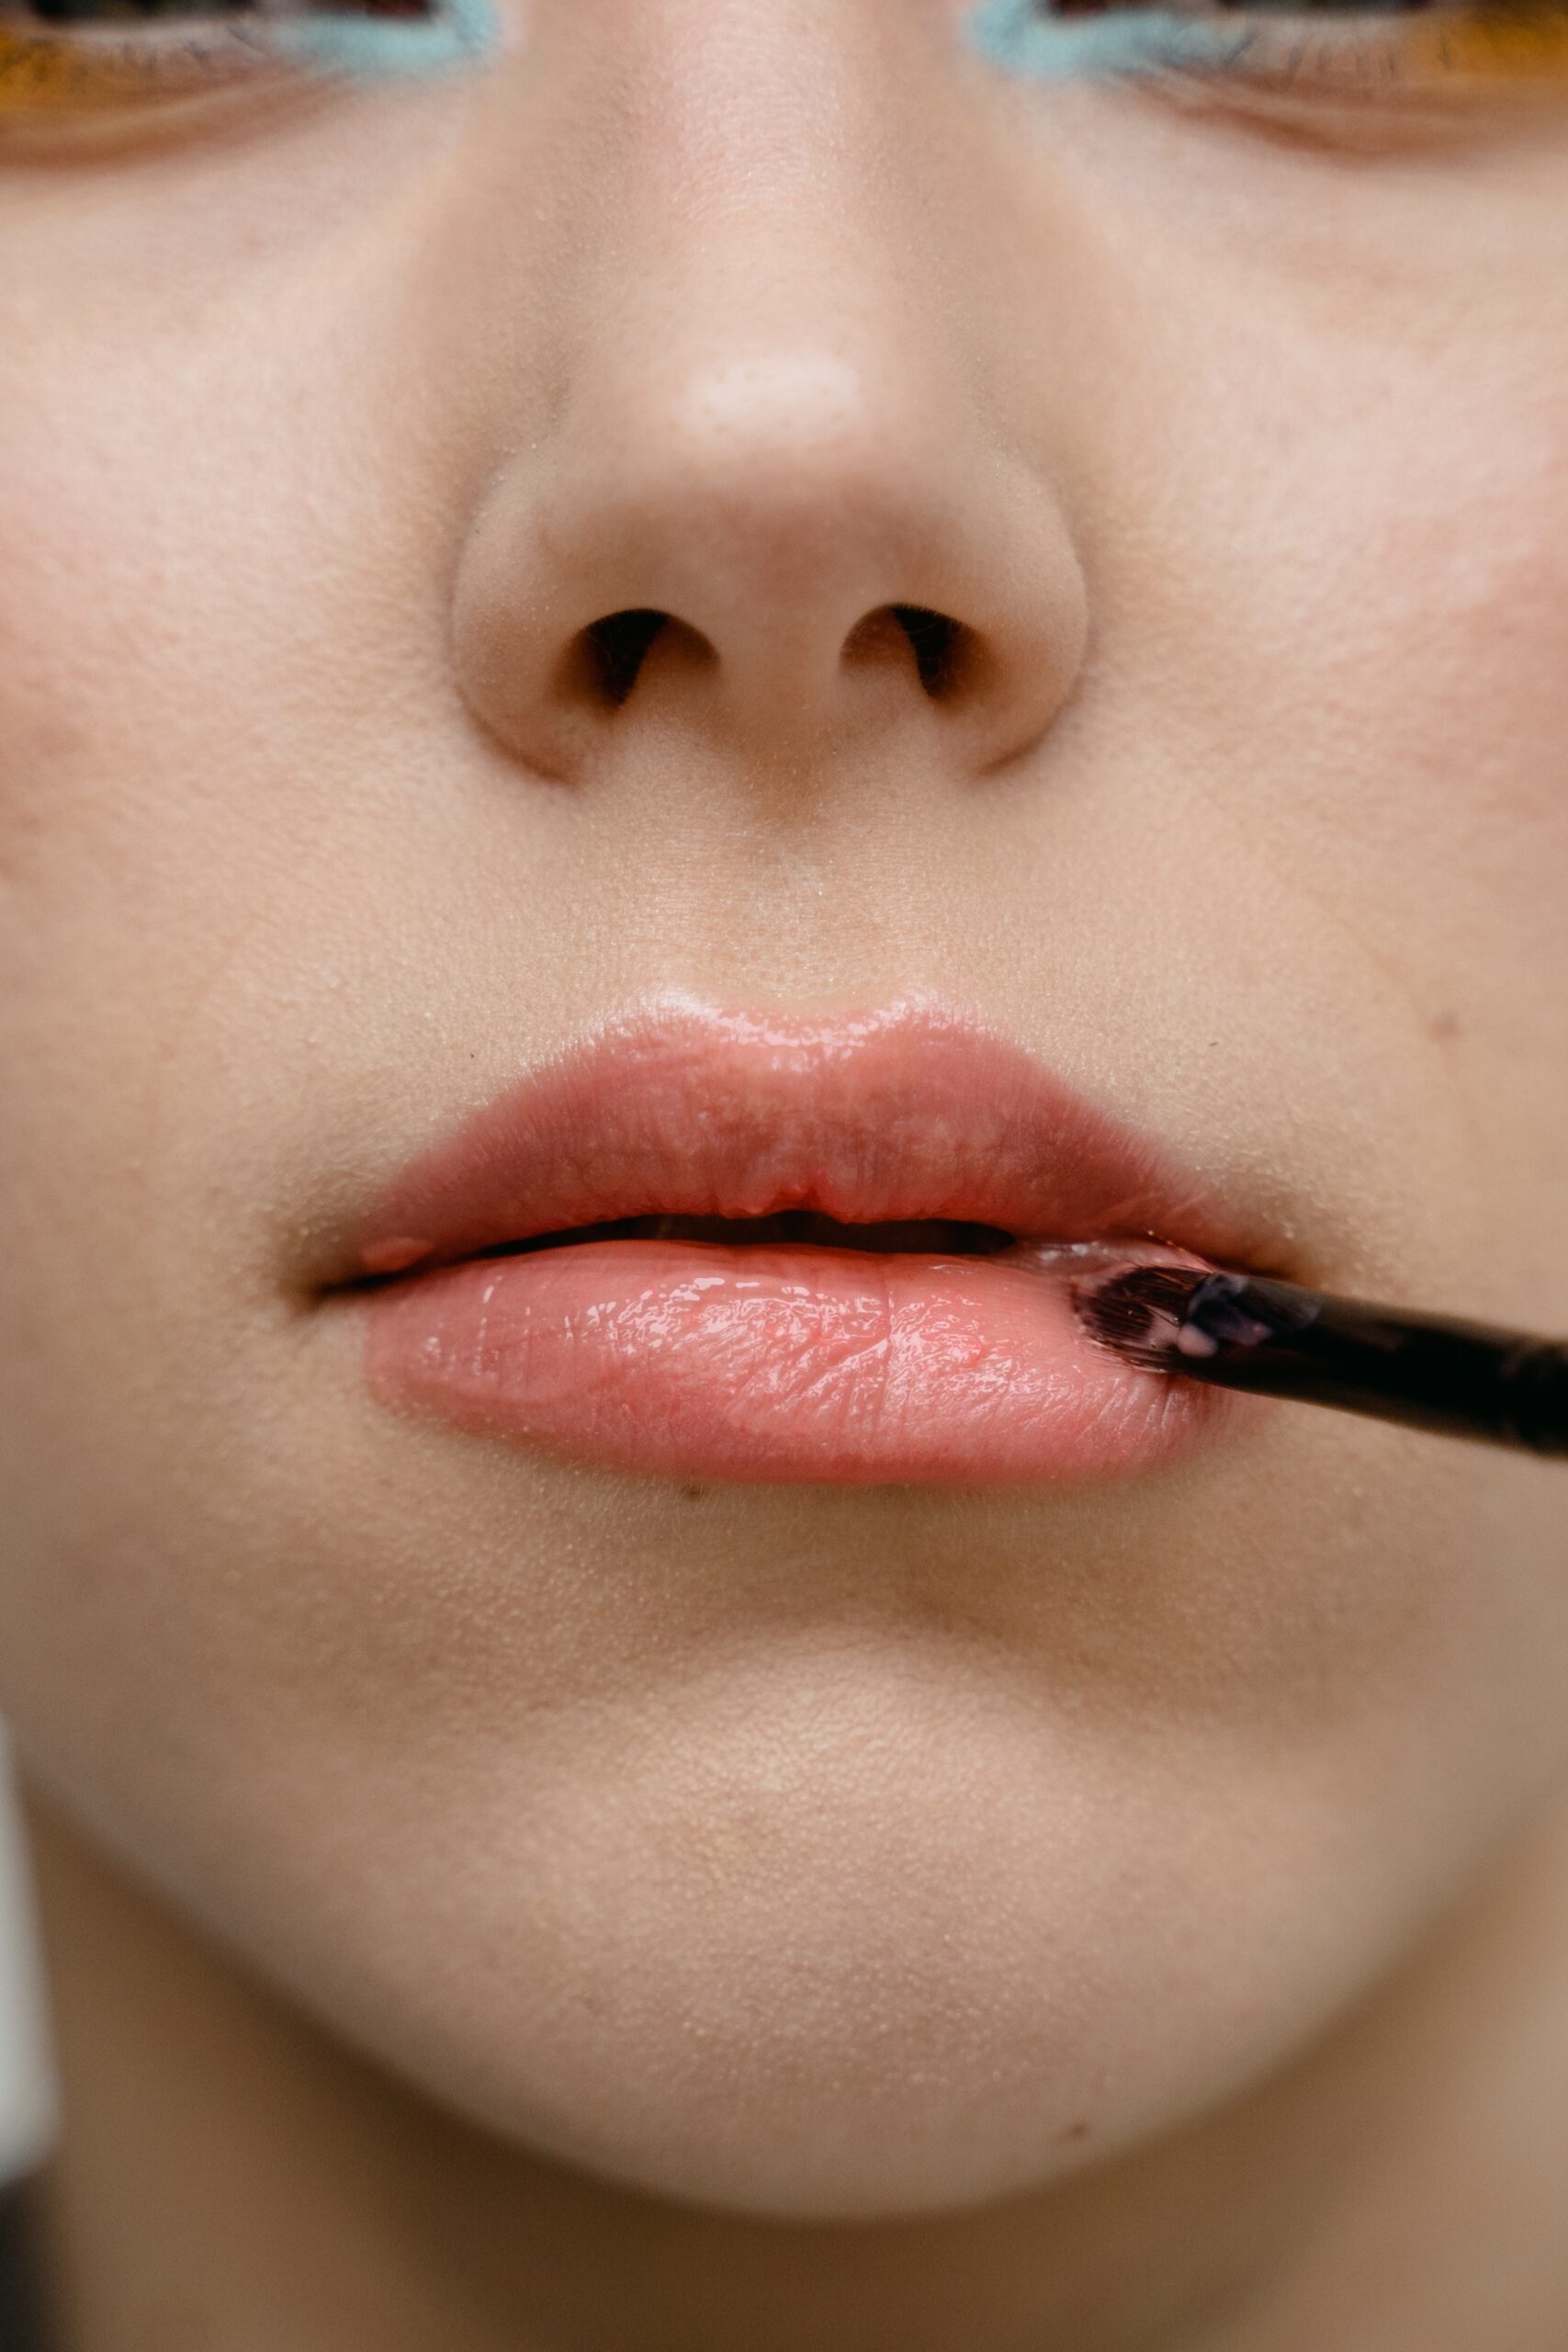 a-close-up-shot-of-a-person-applying-lipstick